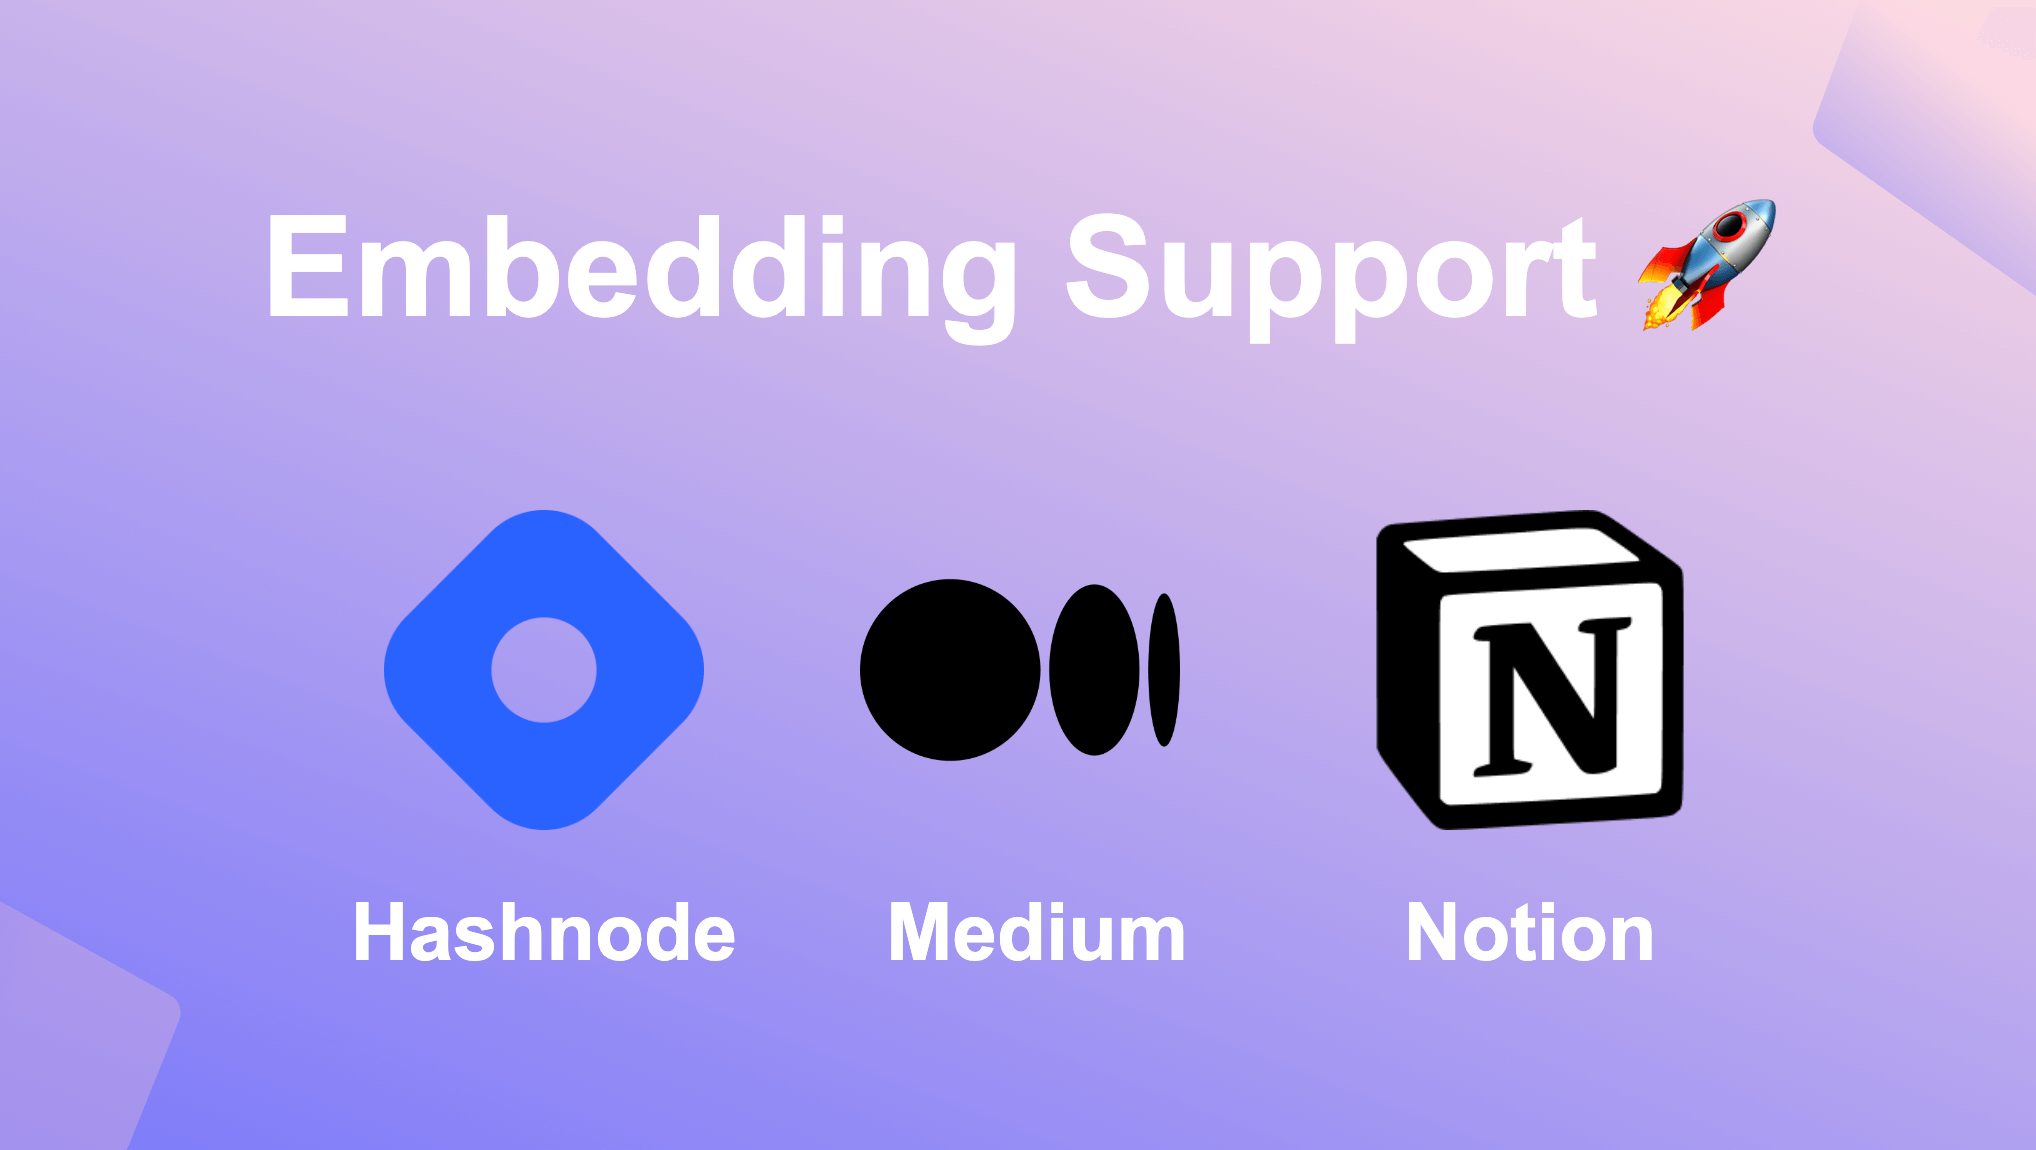 Promotion Image showcasing the new supported embedding platforms